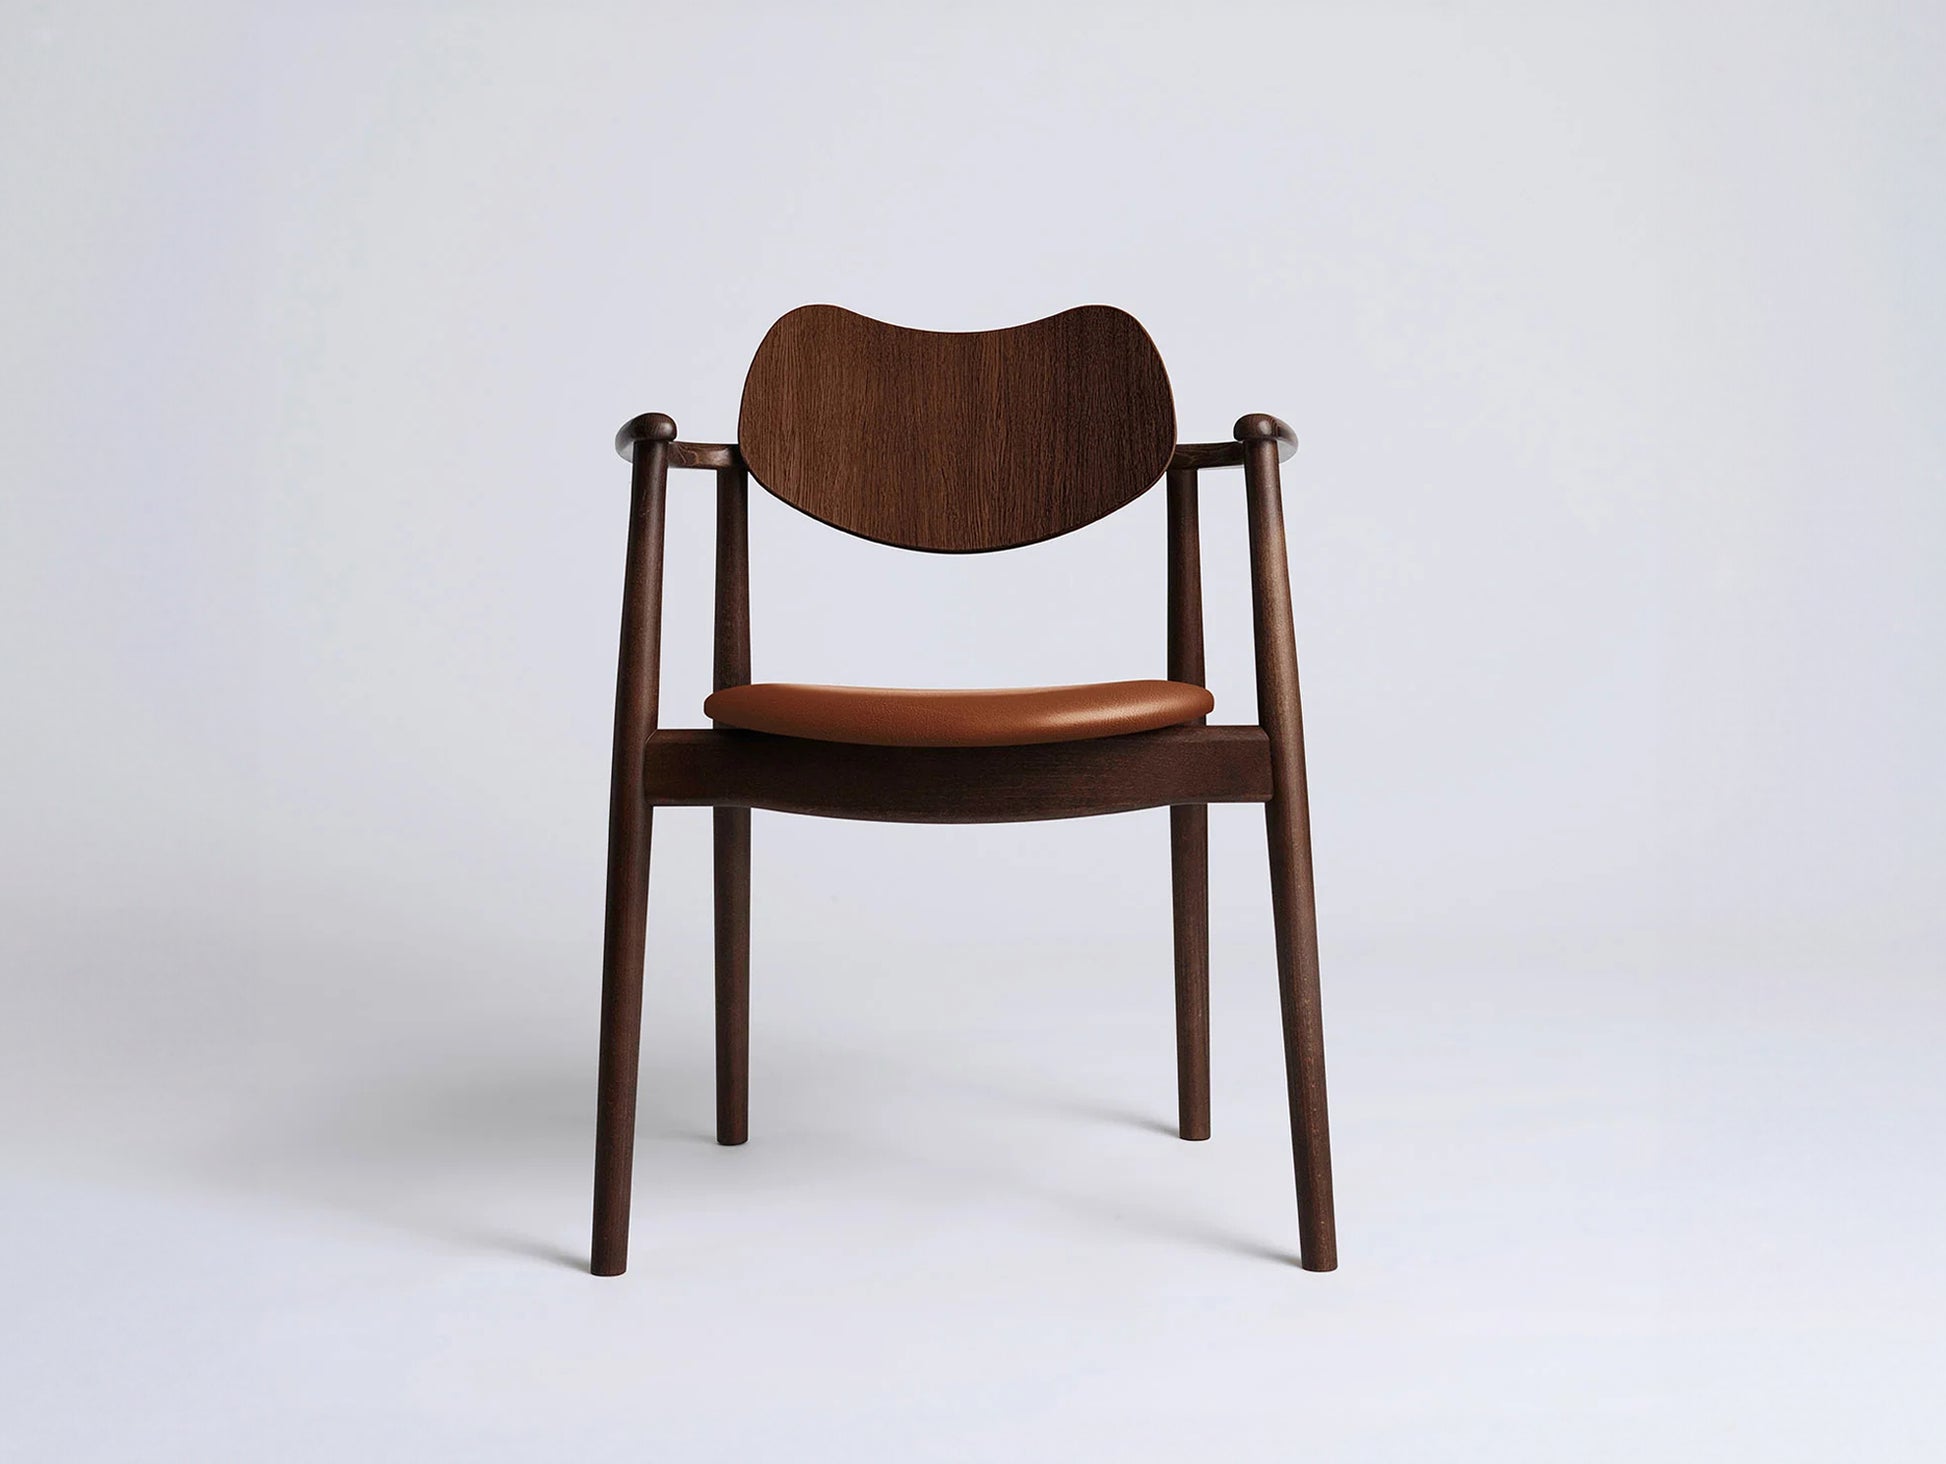 Regatta Chair Seat Upholstered by Ro Collection - Walnut Stained Beech / Exclusive Cognac Leather